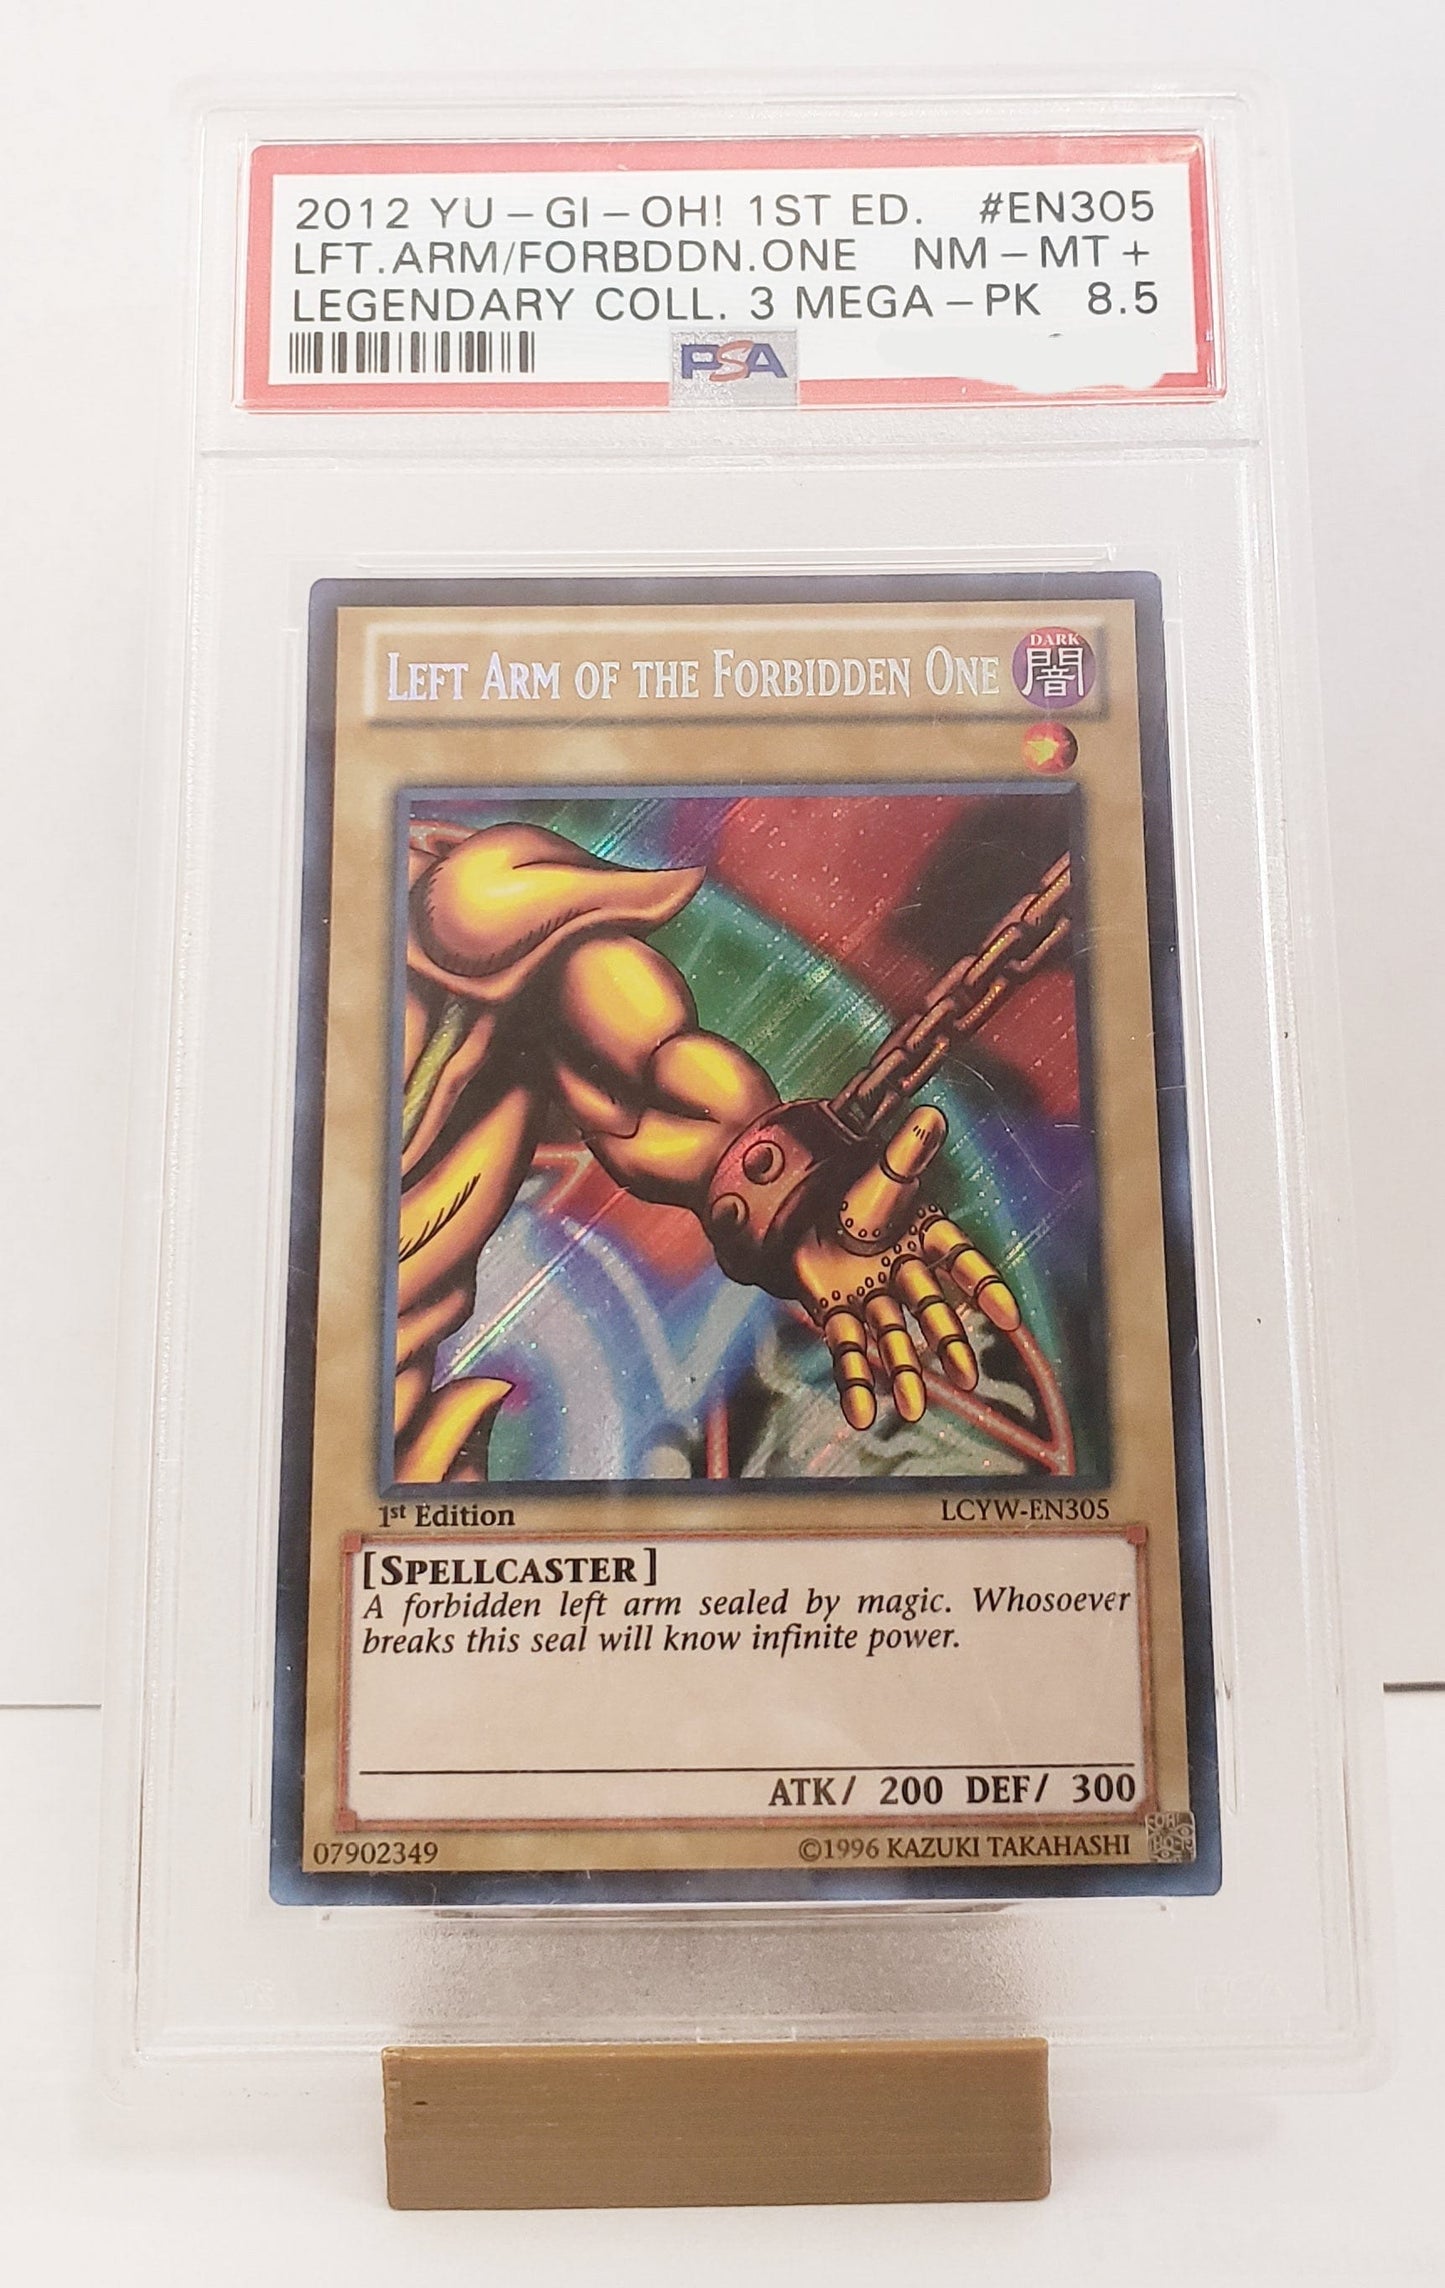 Left Arm of the Forbidden One (LCYW-EN305) PSA 8.5 1st Ed.